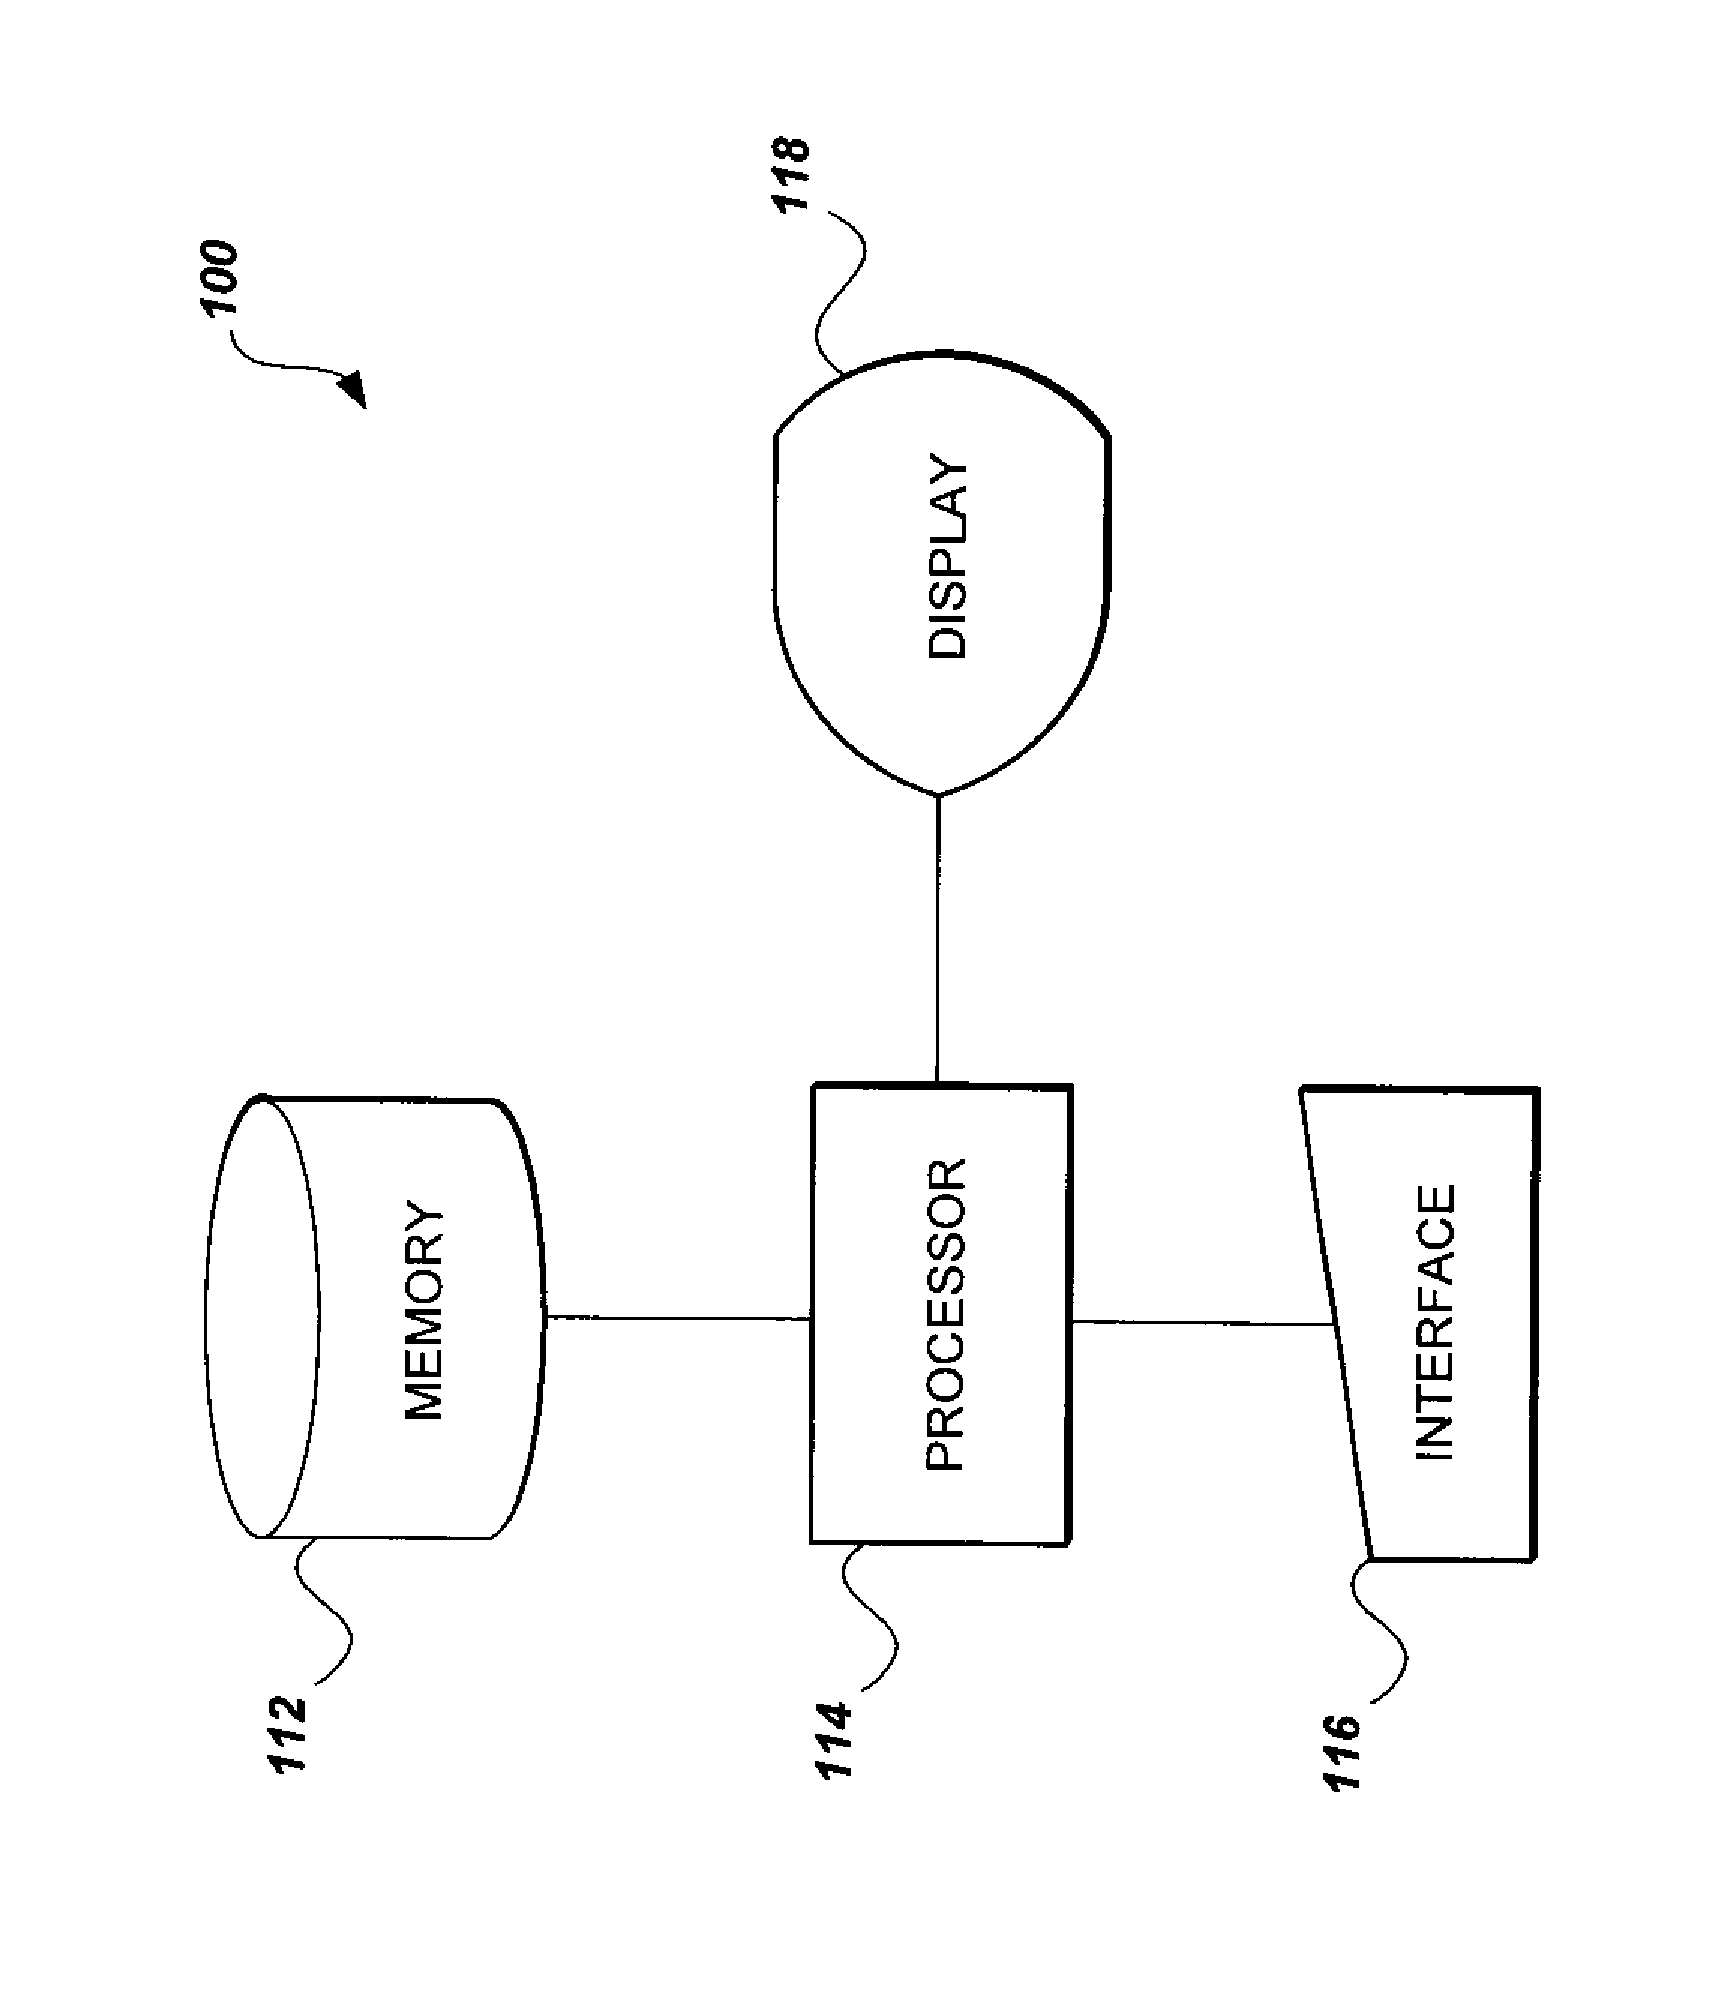 RNS-based cryptographic system and method